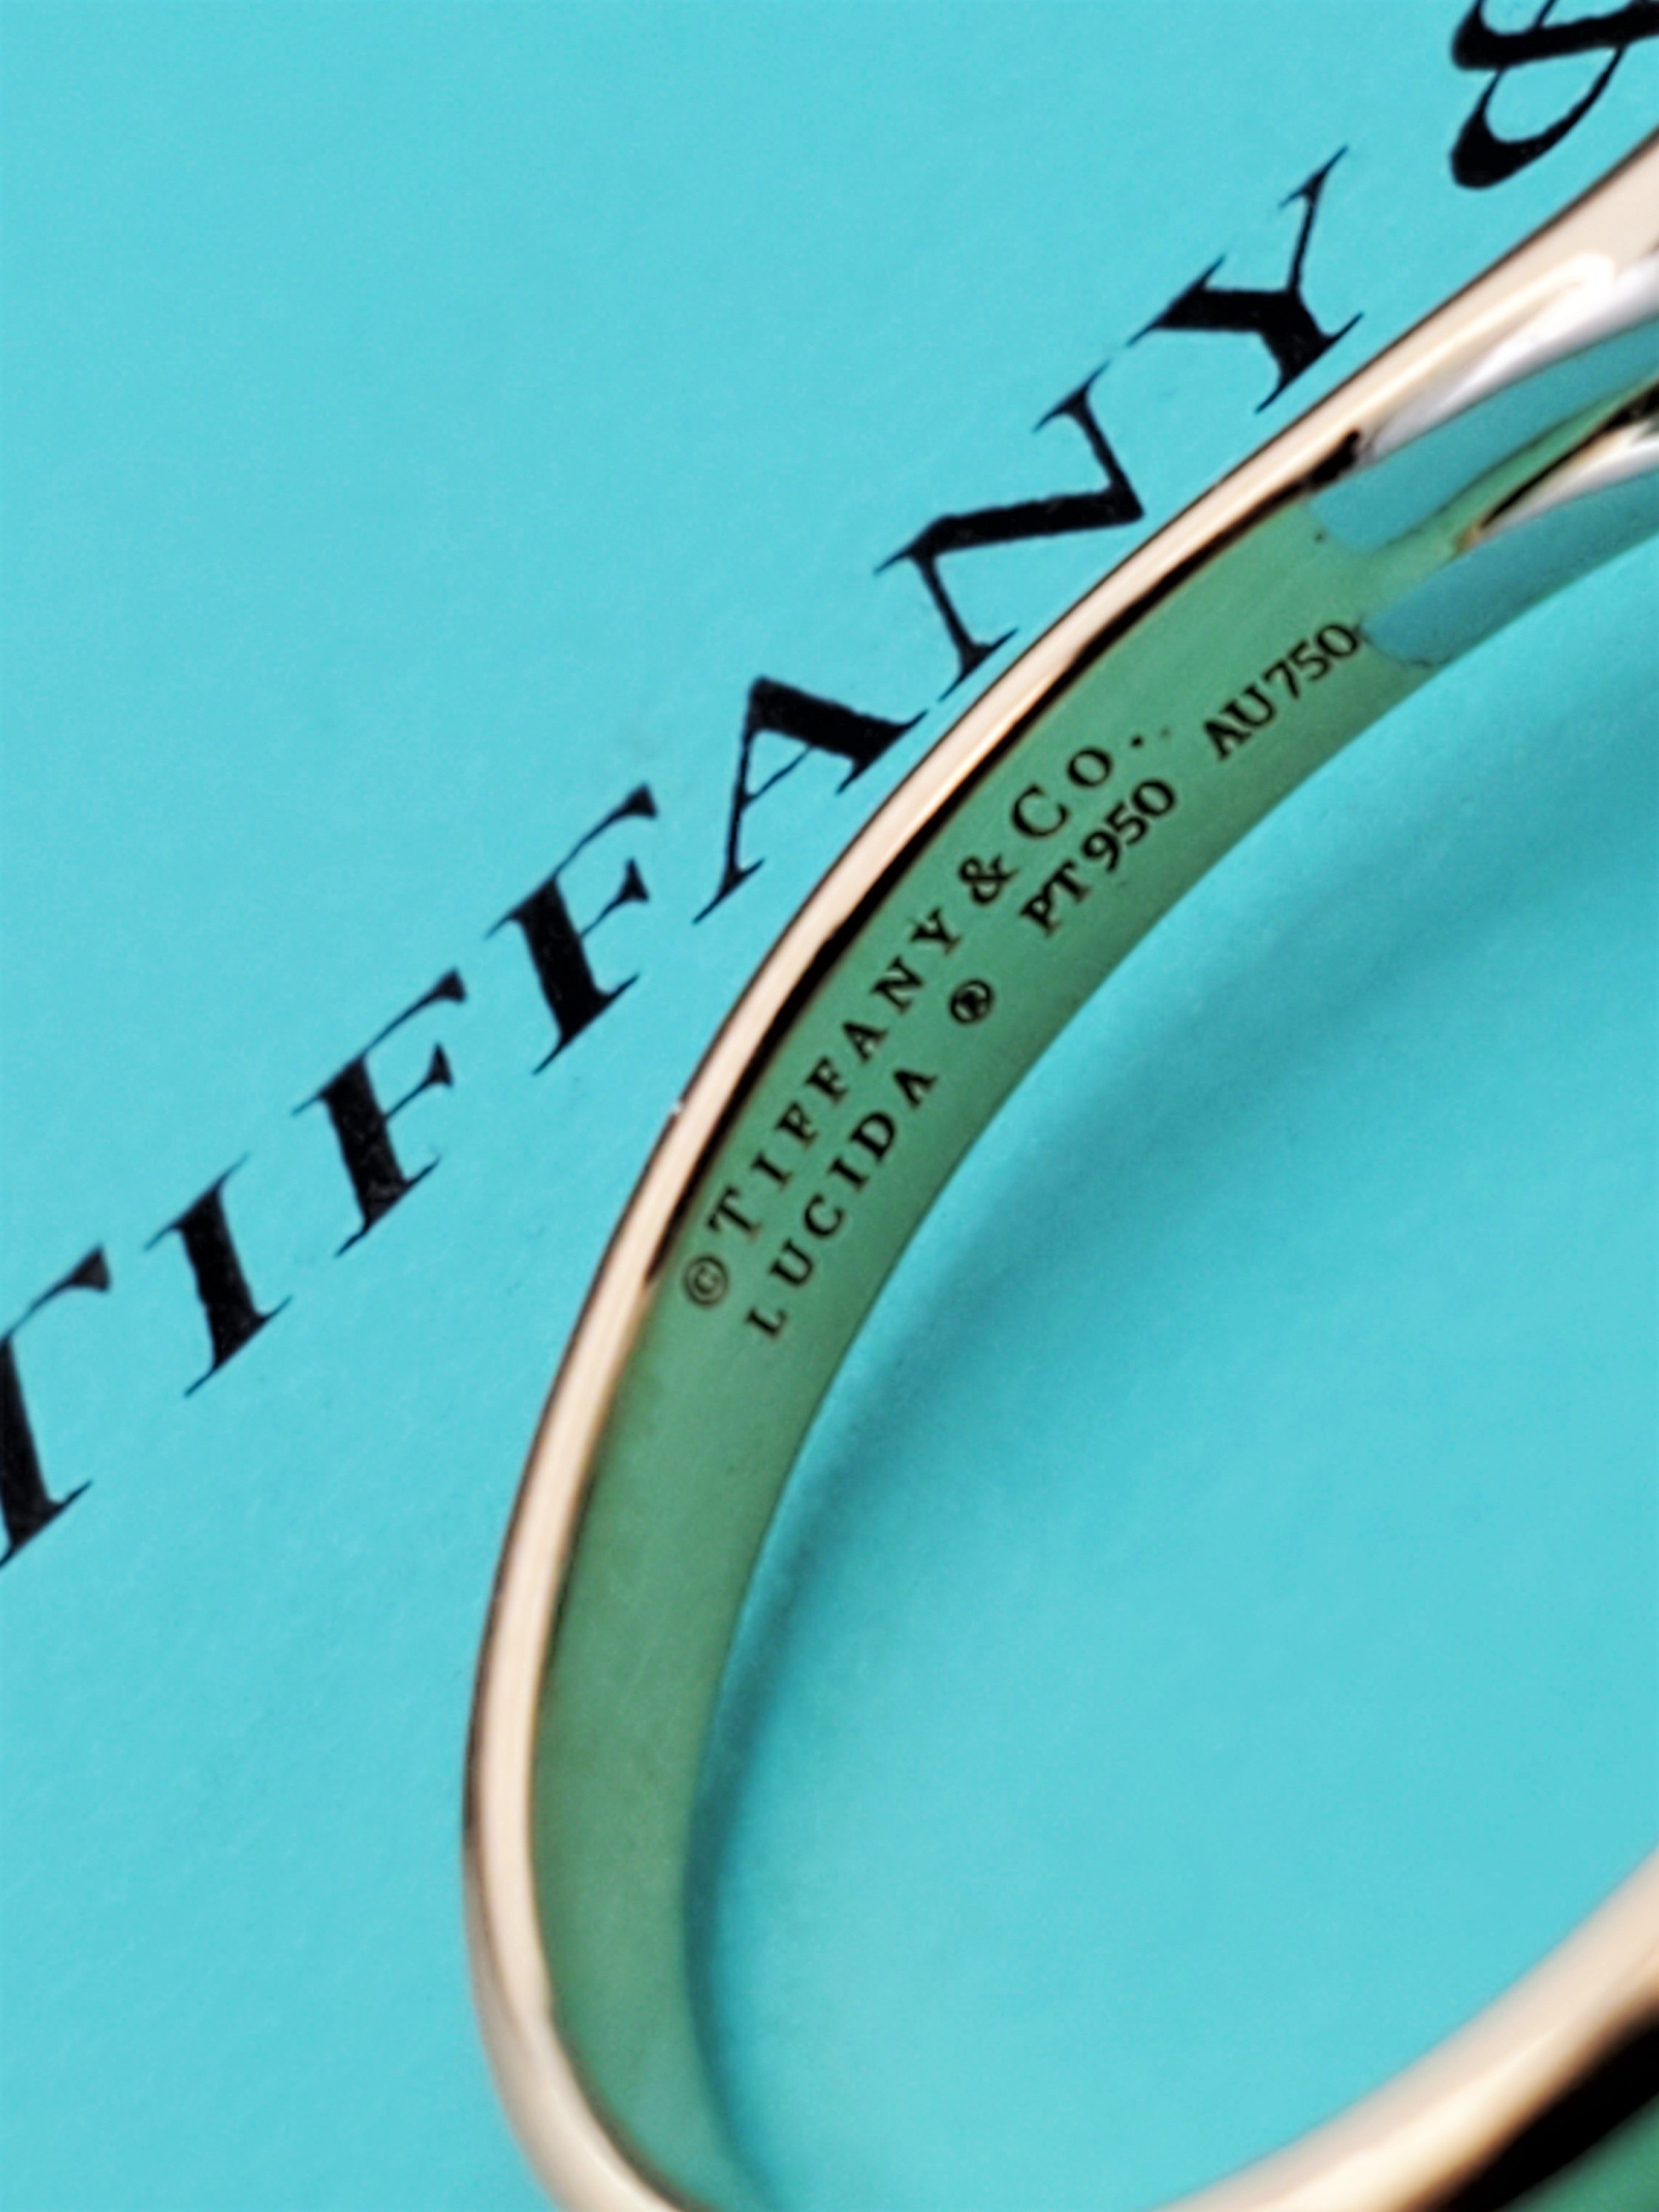 Tiffany & Co. Pre-Owned 18kt Yellow Gold And Platinum Lucida